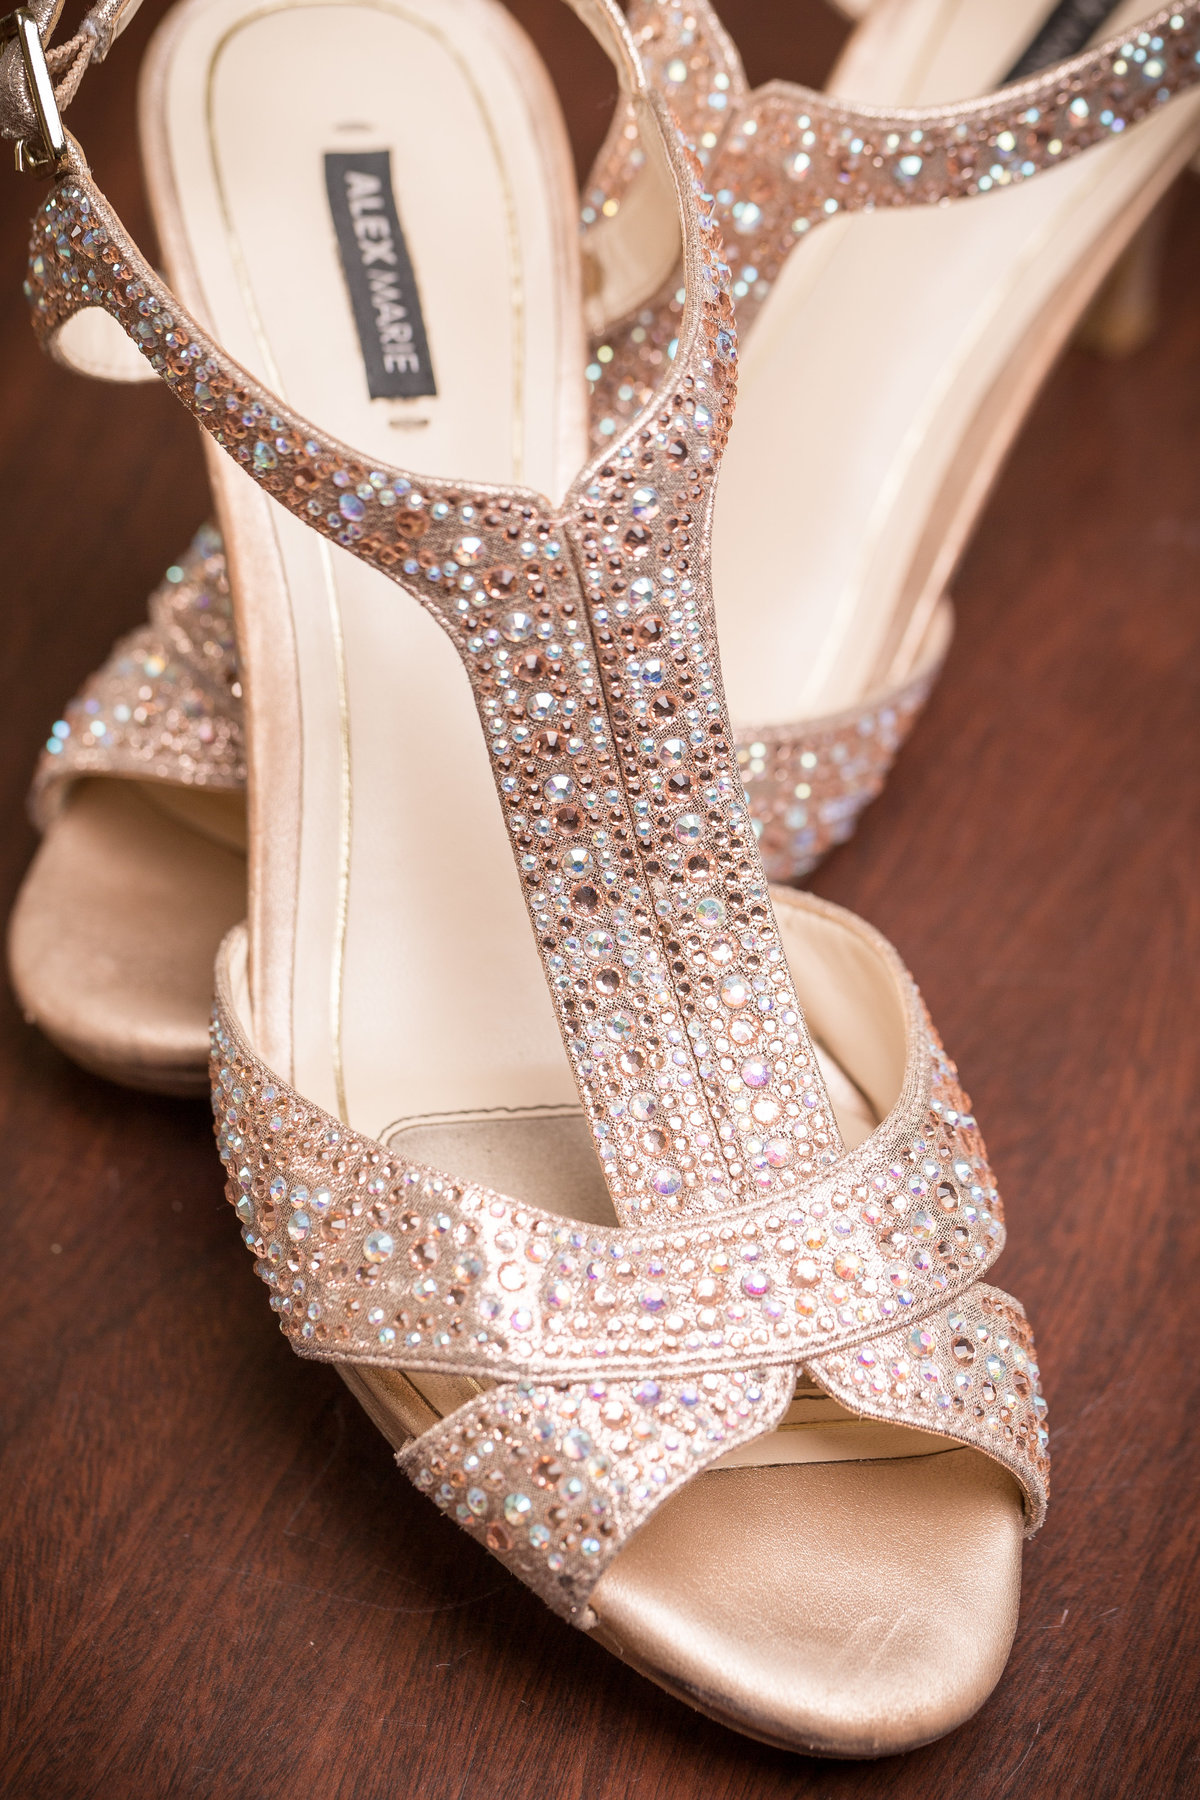 Wedding day detail shot of the bride's shoes.